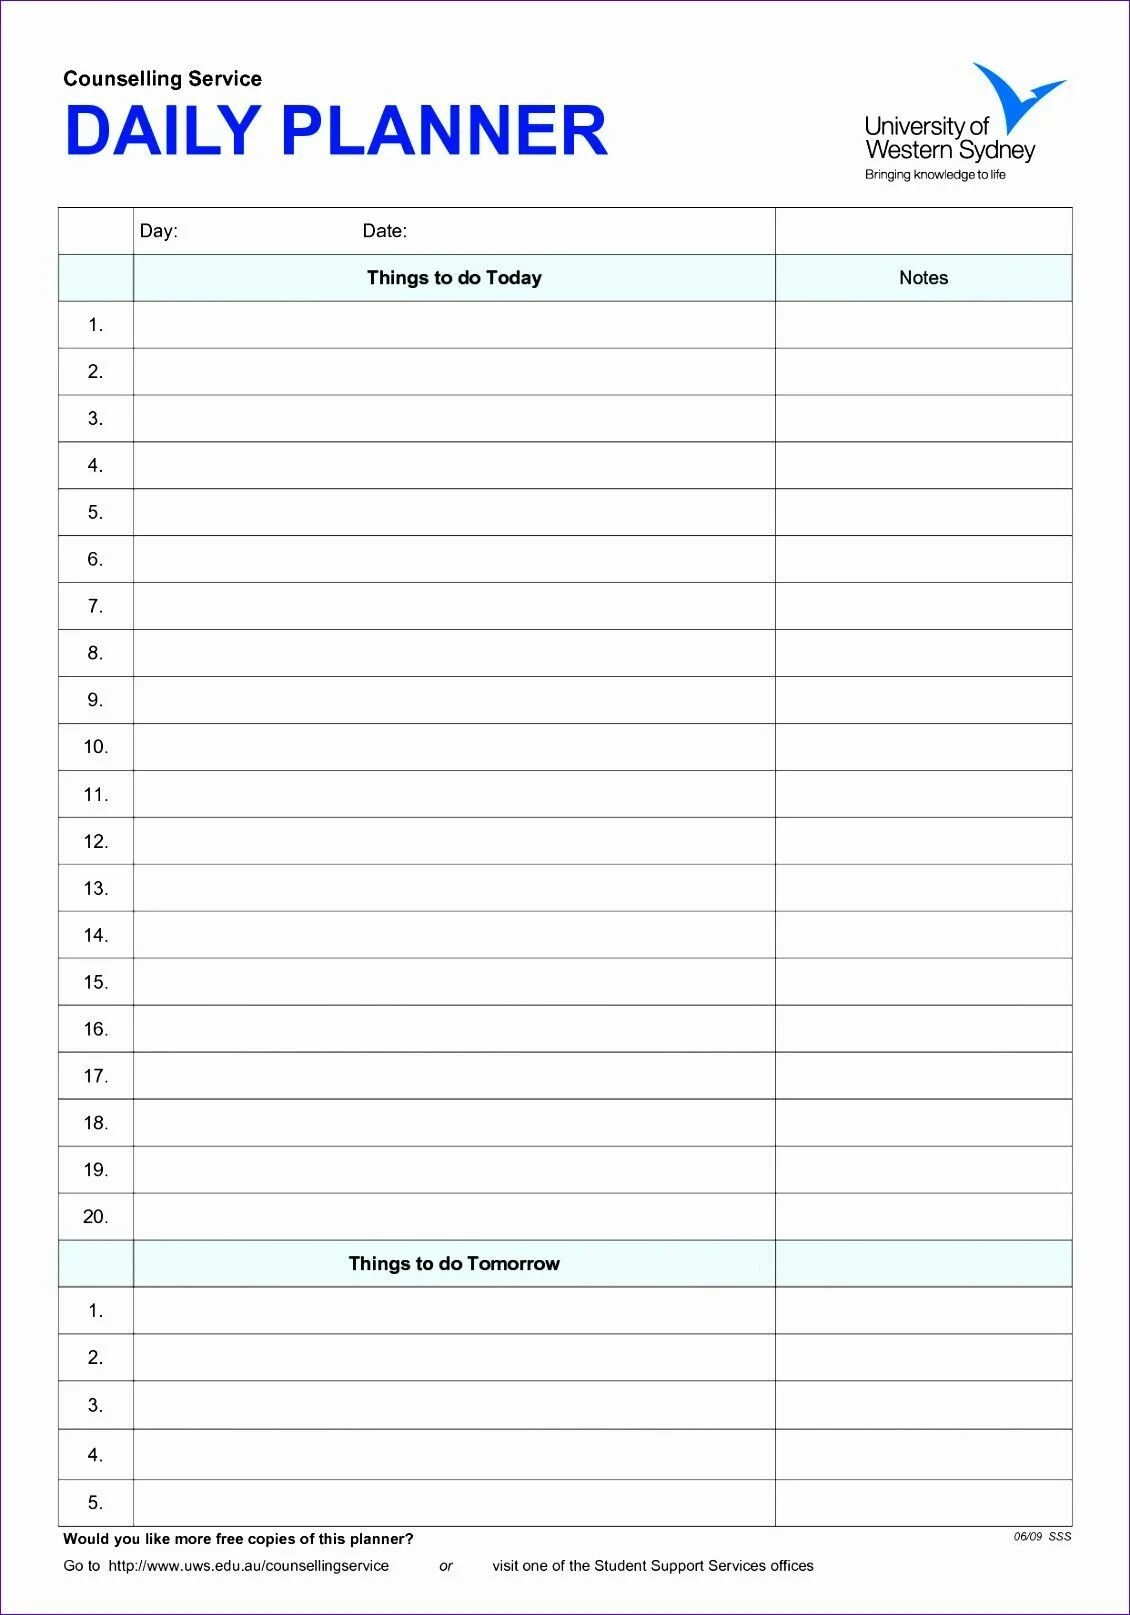 Daily plans. Daily Planner. Day Planner Template. Daily Planner для печати. Daily Planner шаблон.